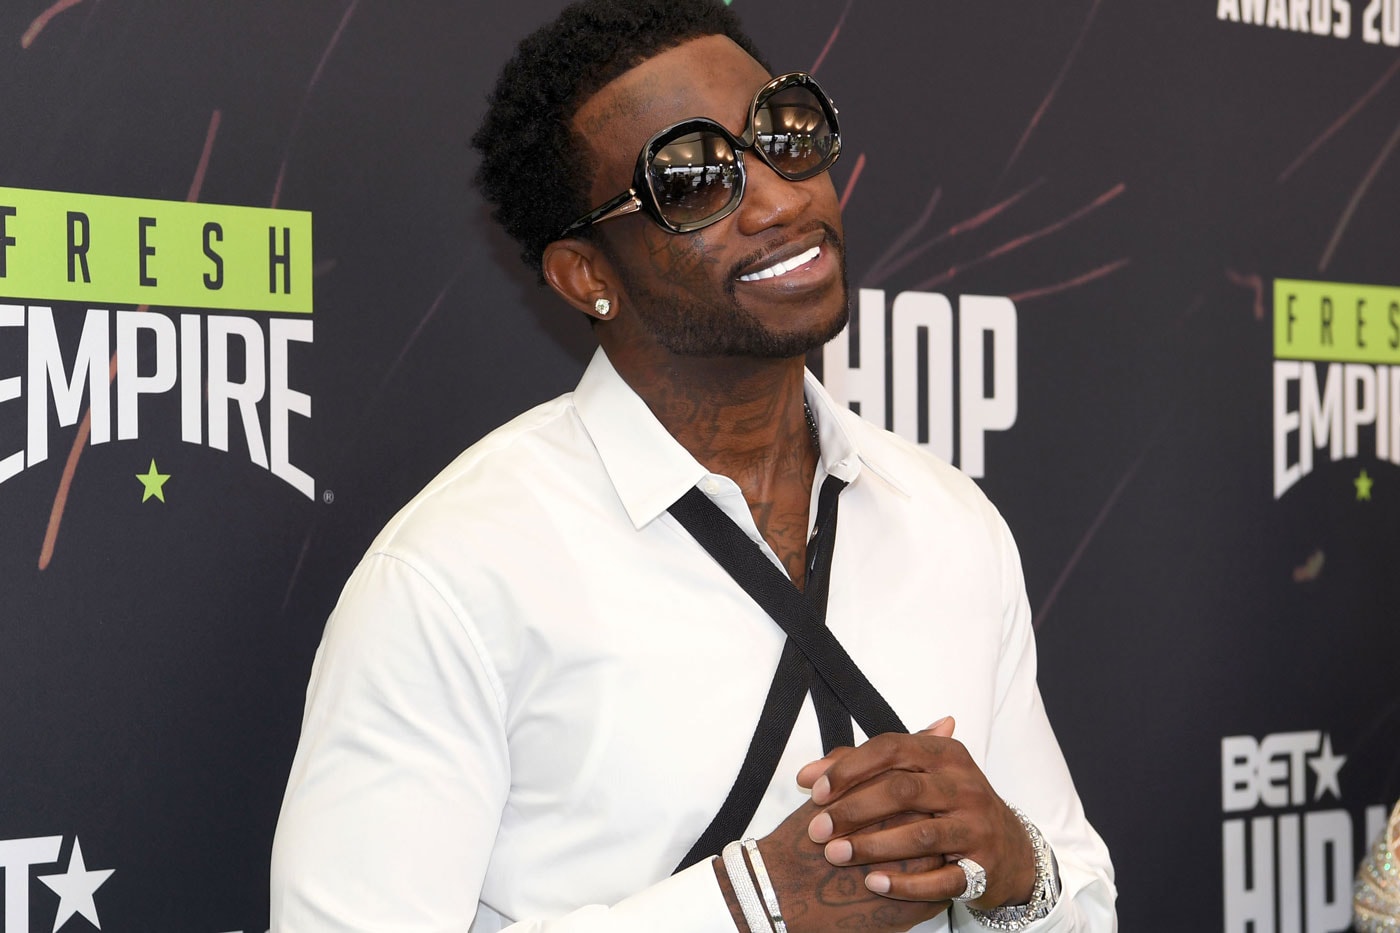 Watch Gucci Mane React to His Fans' "Sweet Tweets"